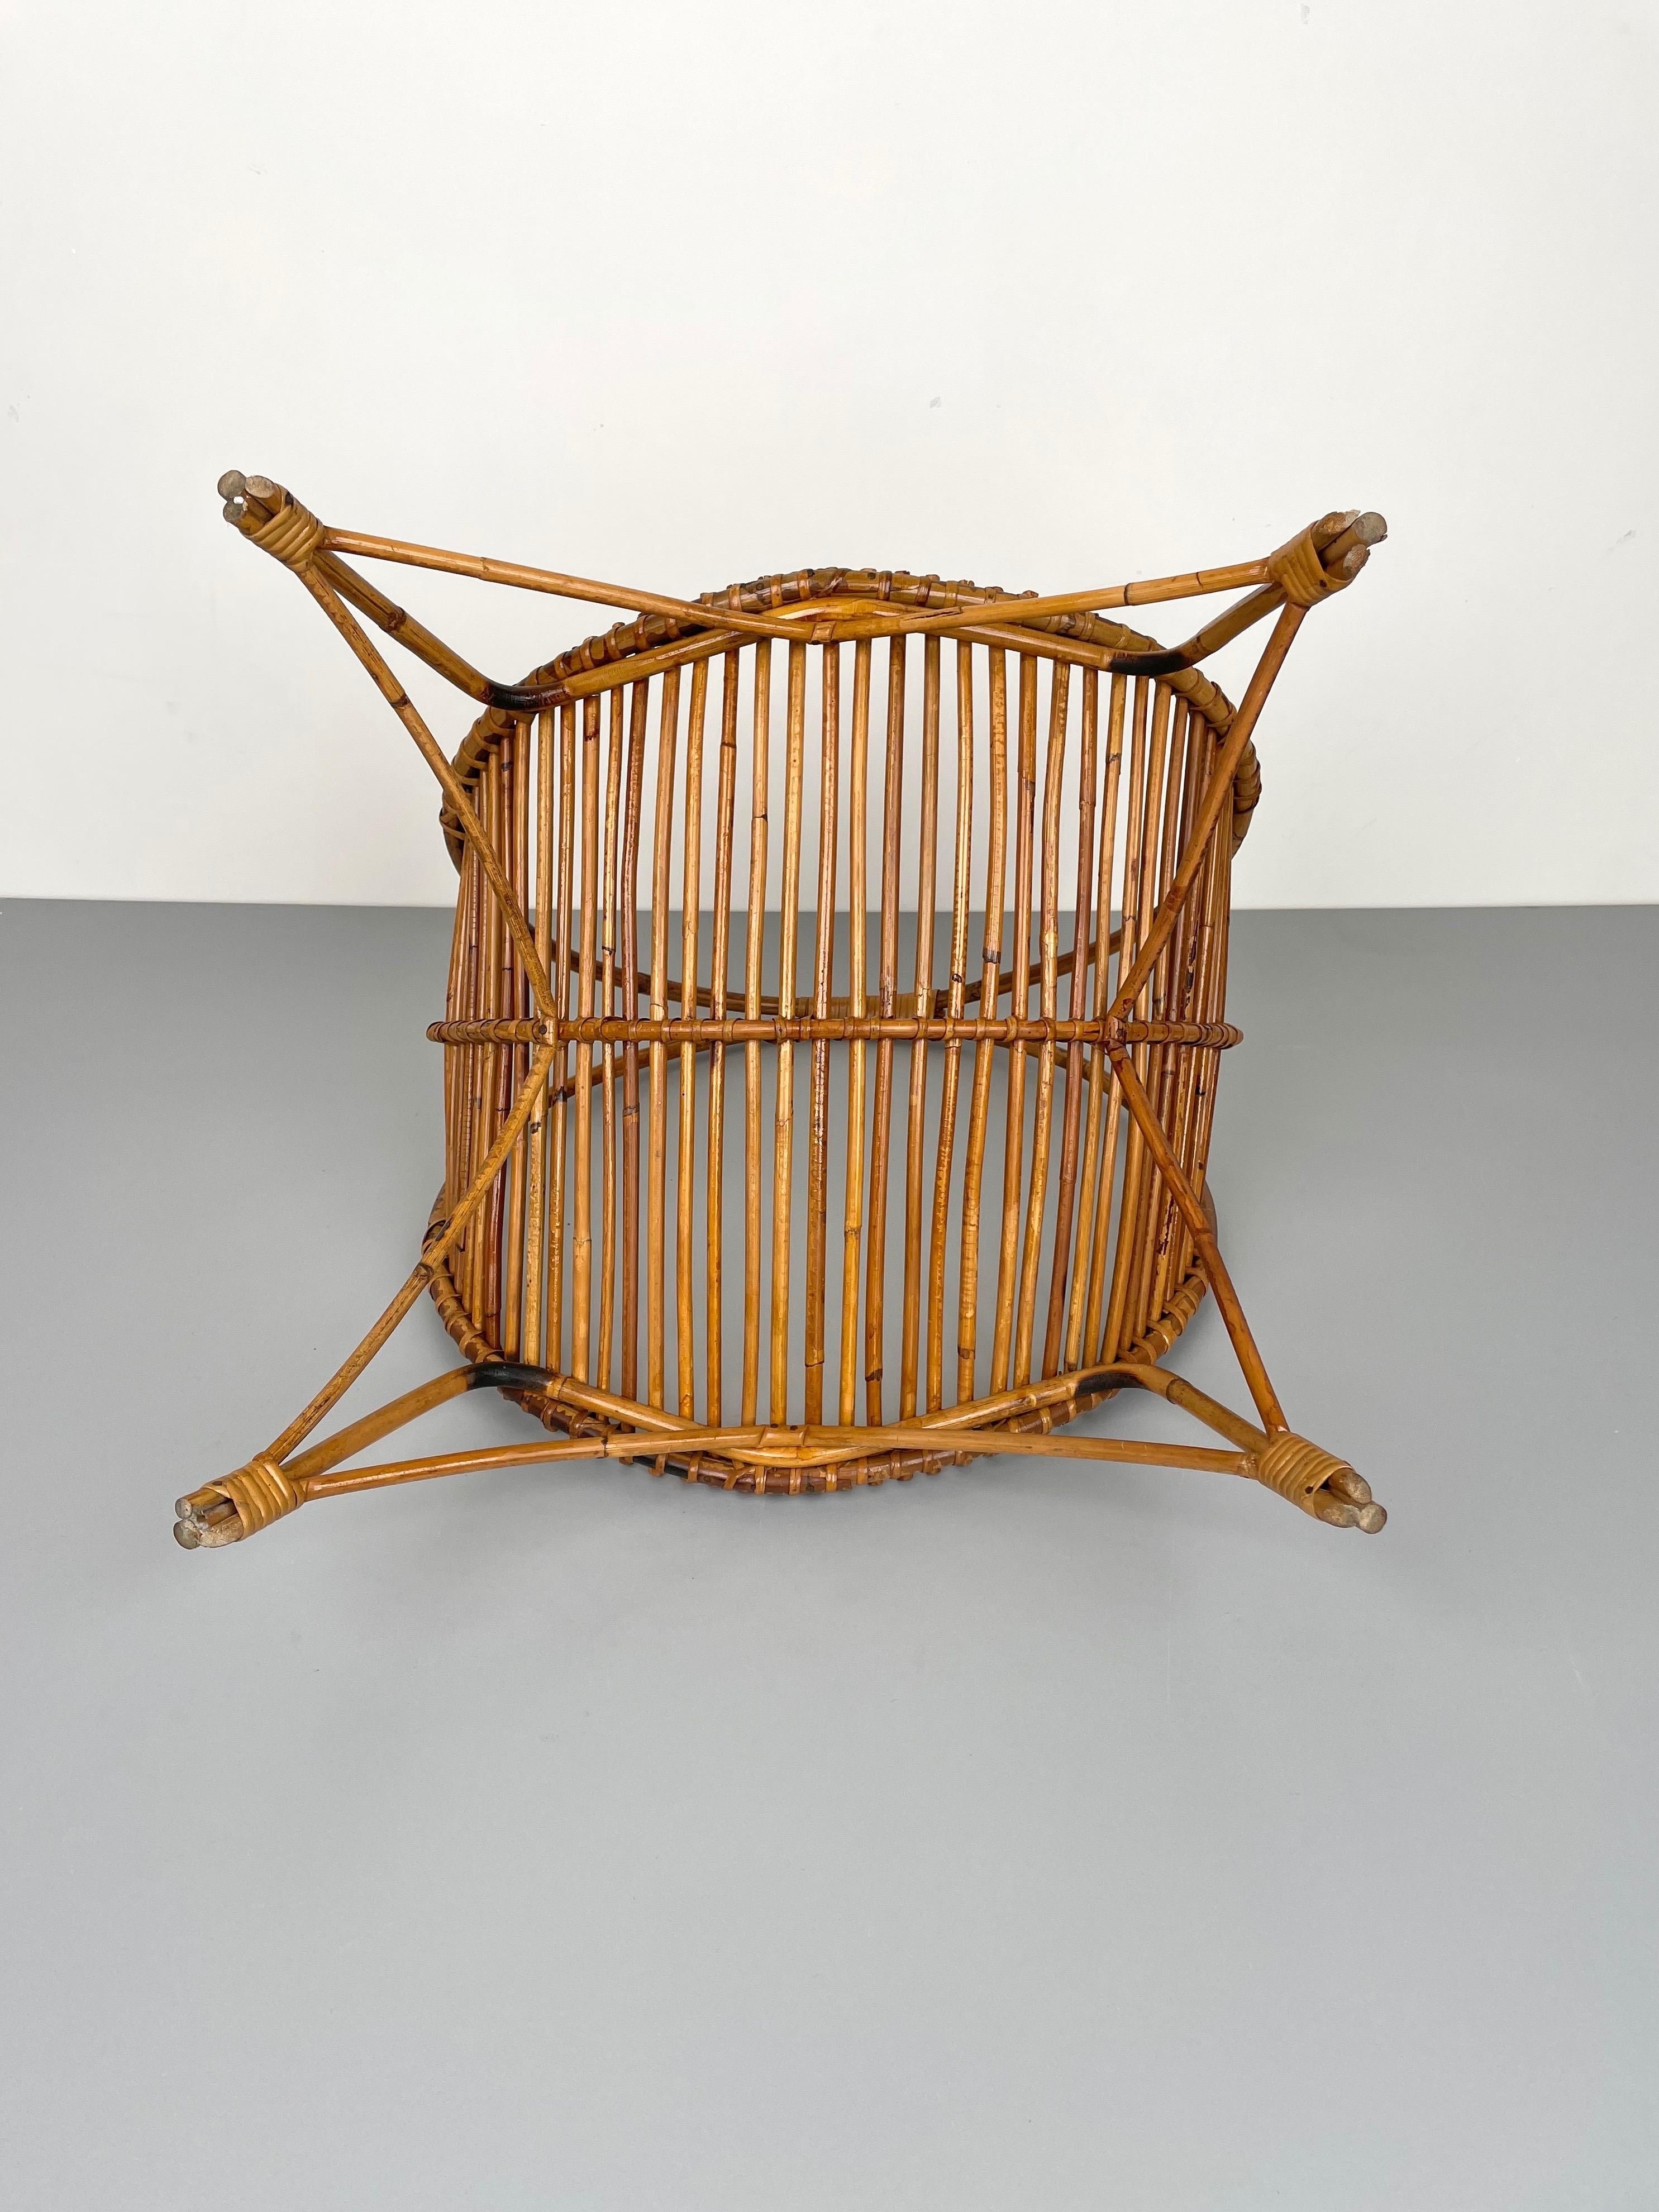 Rattan & Bamboo Curved Magazine Rack, Italy, 1960s For Sale 6